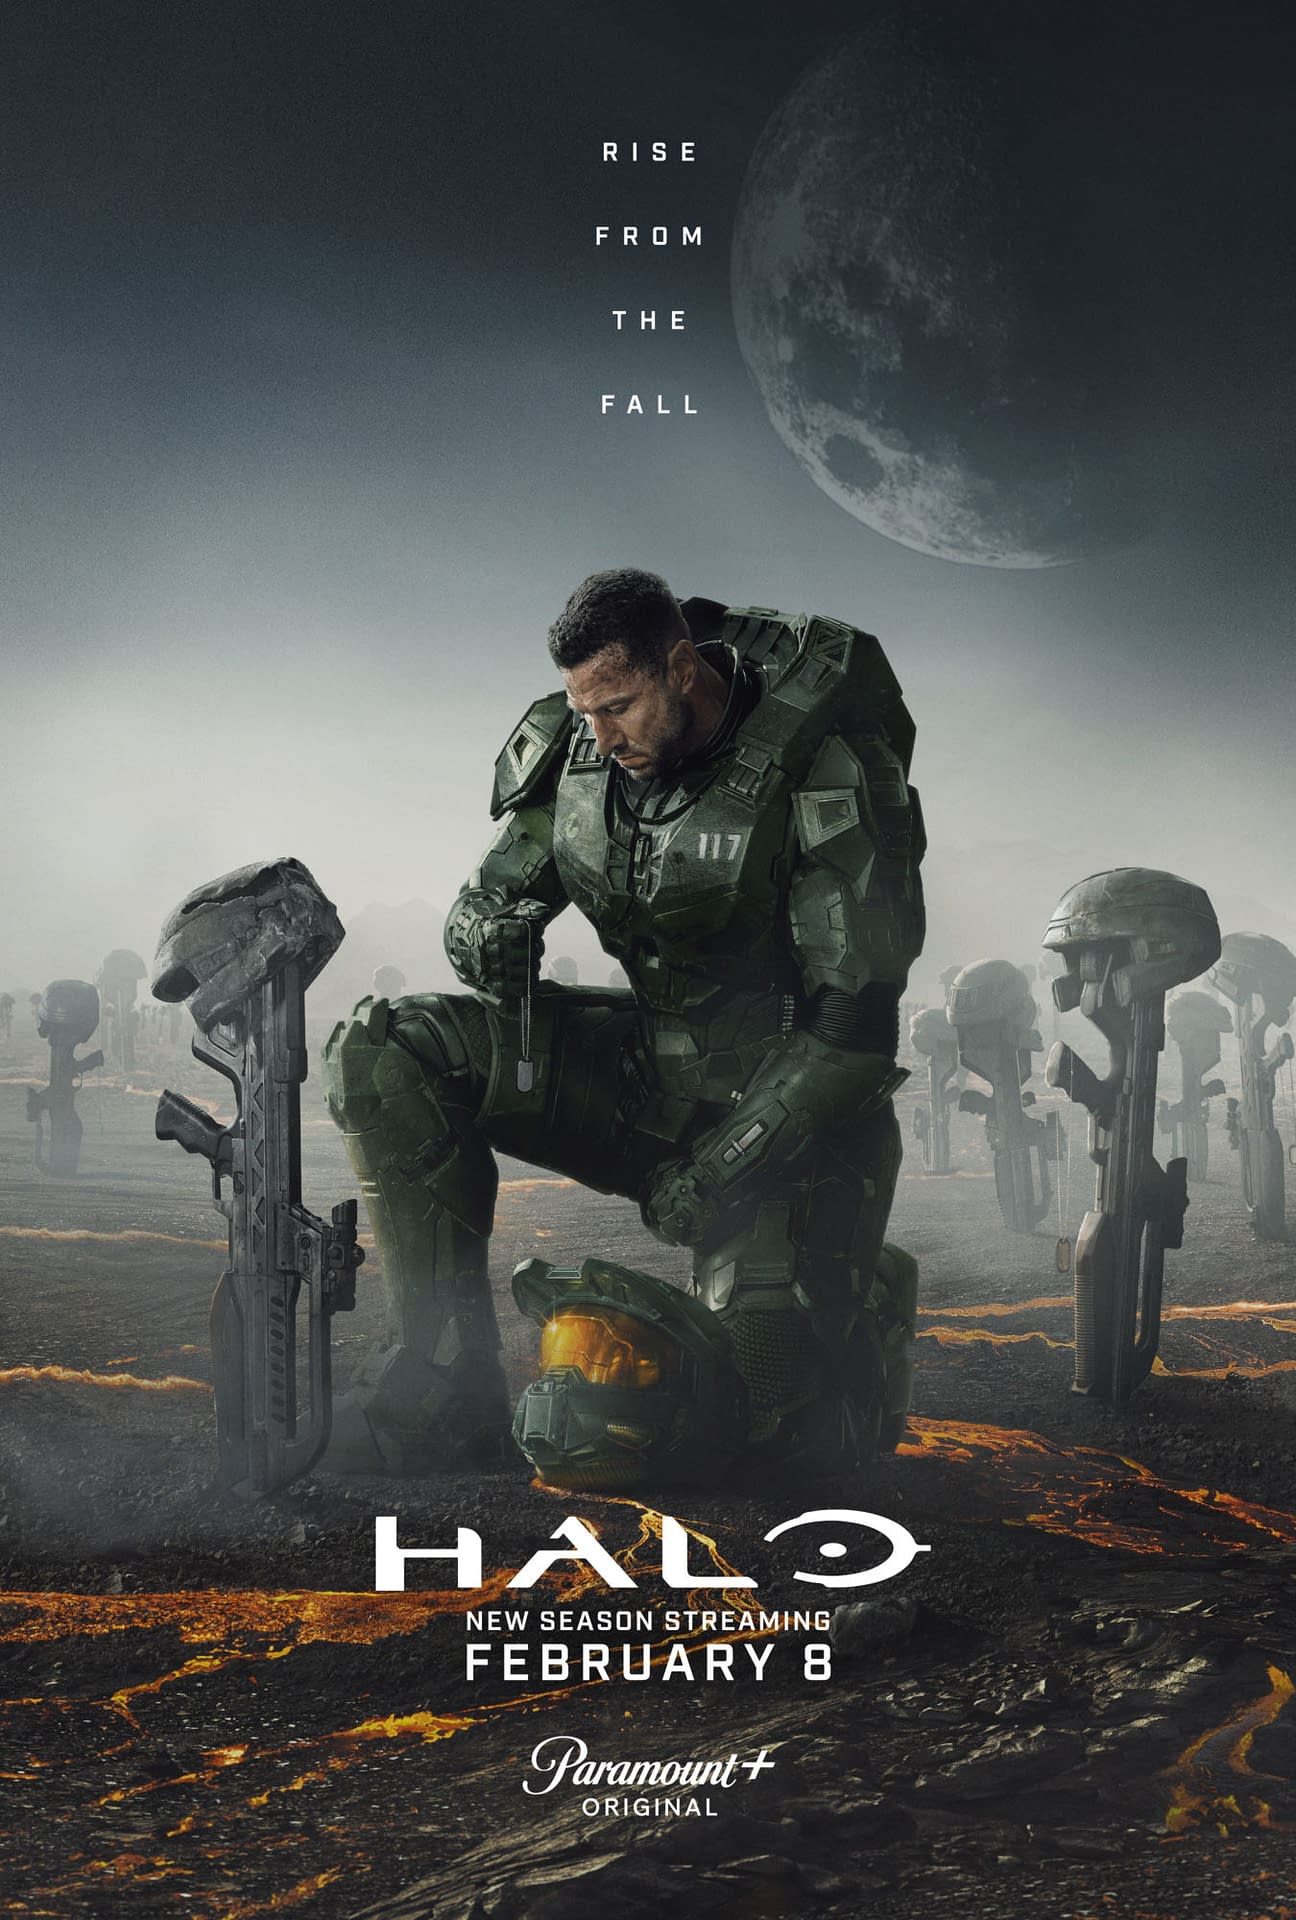 Teaser Trailer Drops For HALO Season 2 - They Will Be Remembered